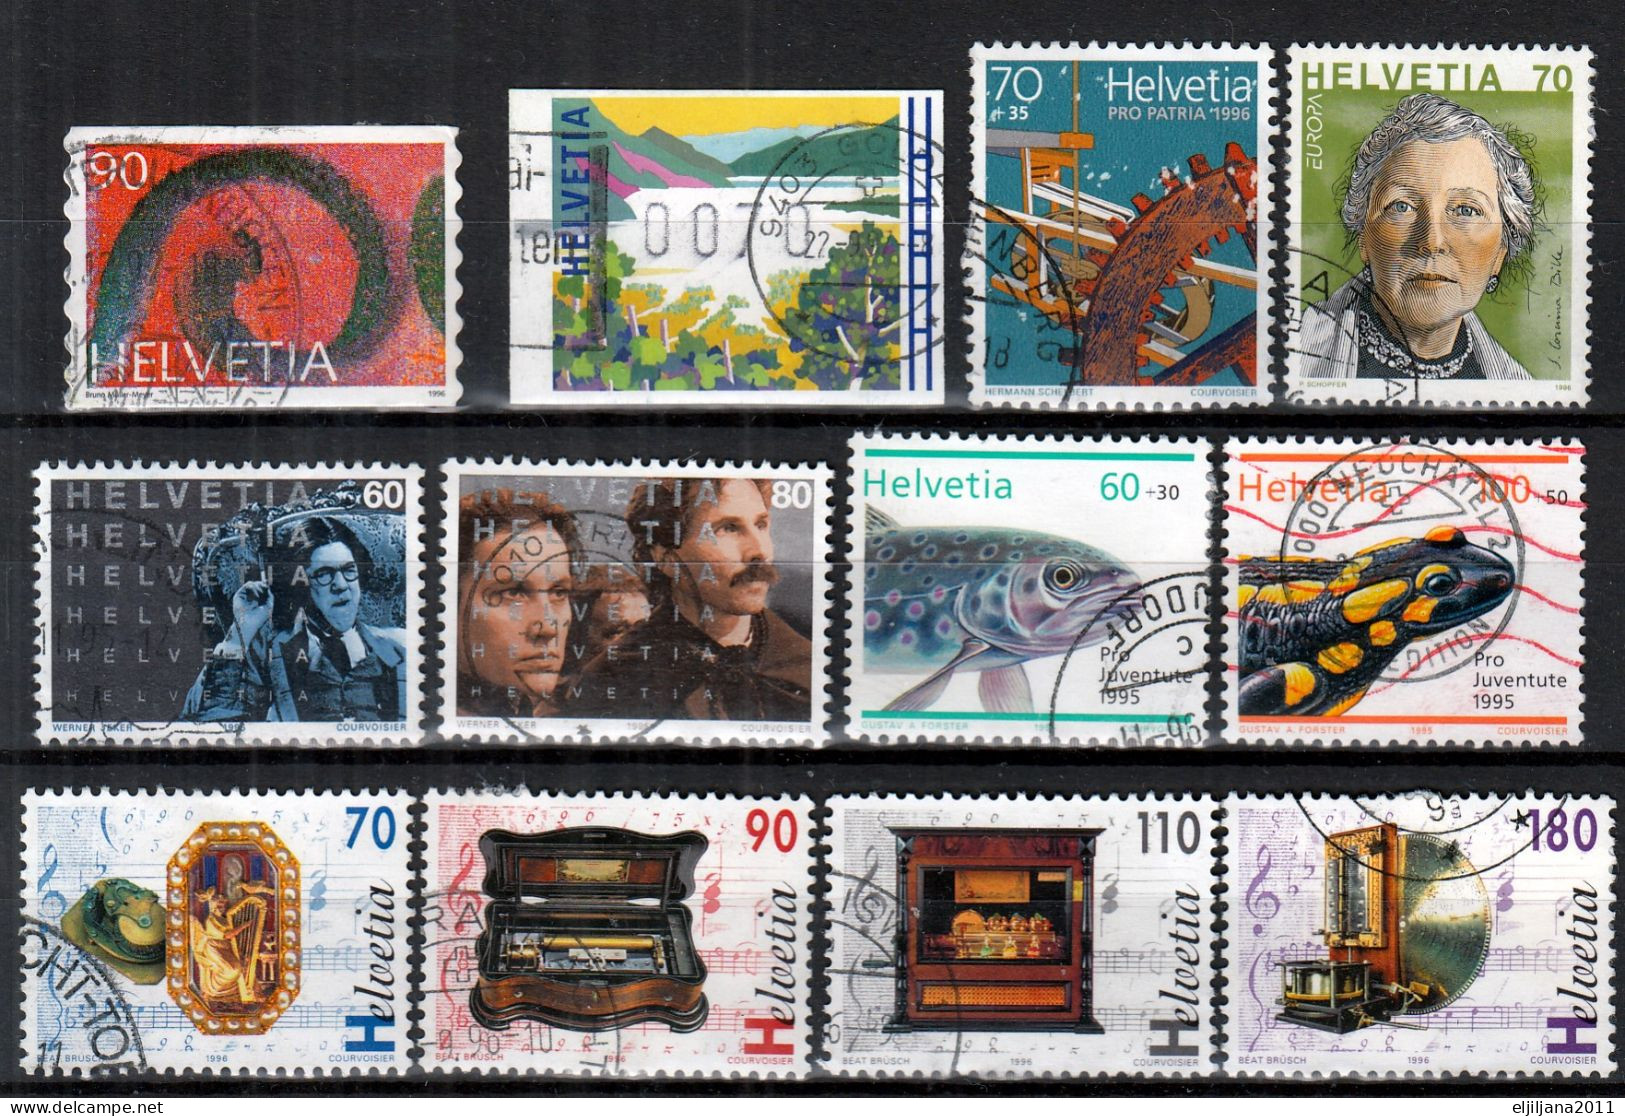 Switzerland / Helvetia / Schweiz / Suisse 1995 - 1996 ⁕ Nice Collection / Lot Of 27 Used Stamps - See All Scan - Usati